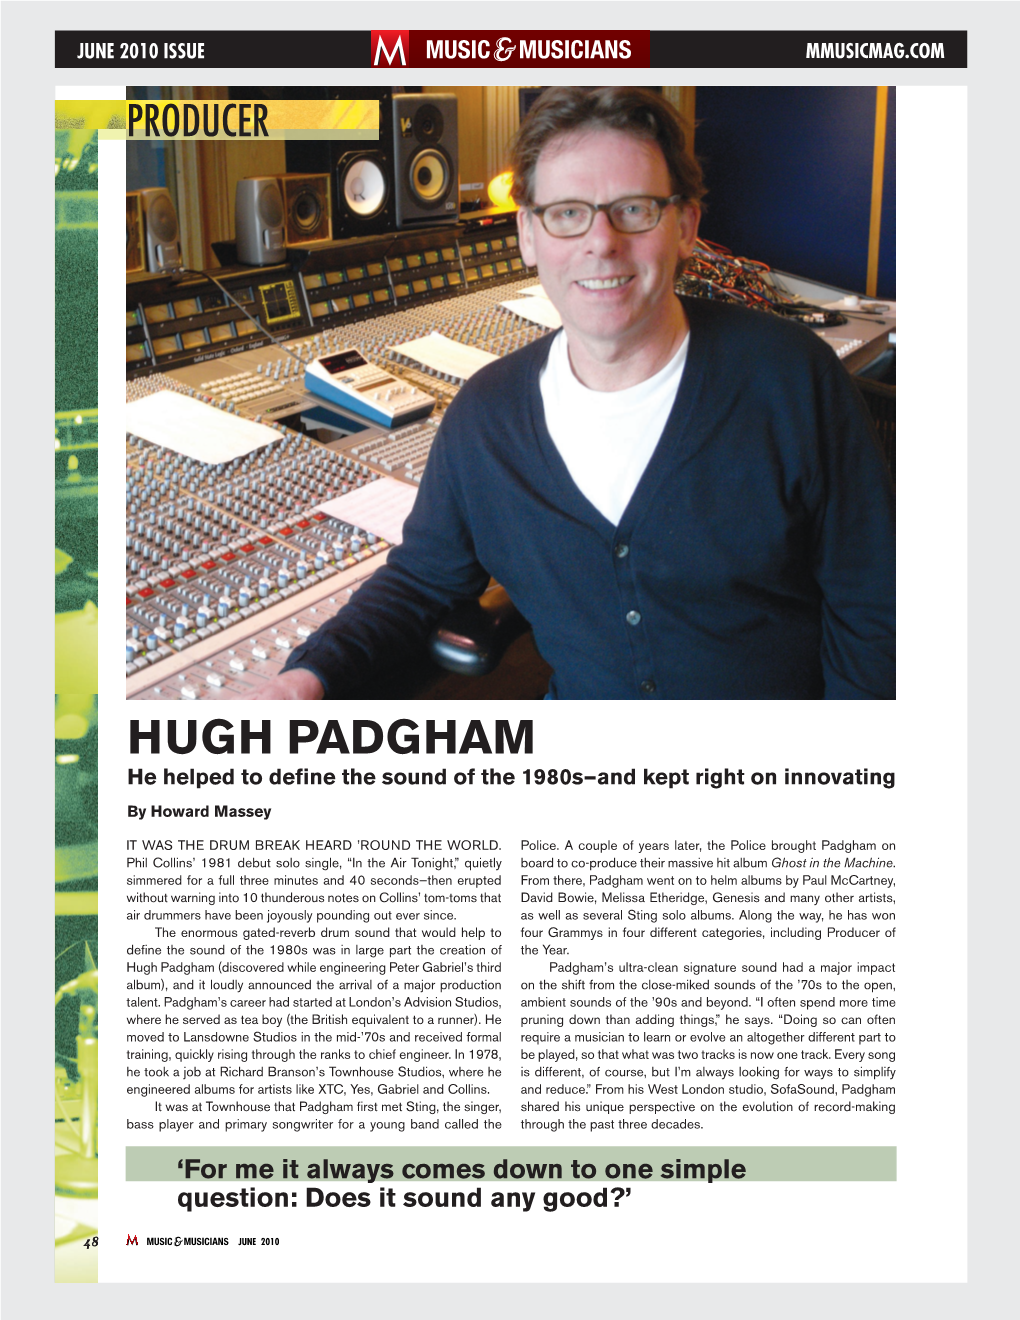 HUGH PADGHAM He Helped to Deﬁ Ne the Sound of the 1980S—And Kept Right on Innovating by Howard Massey